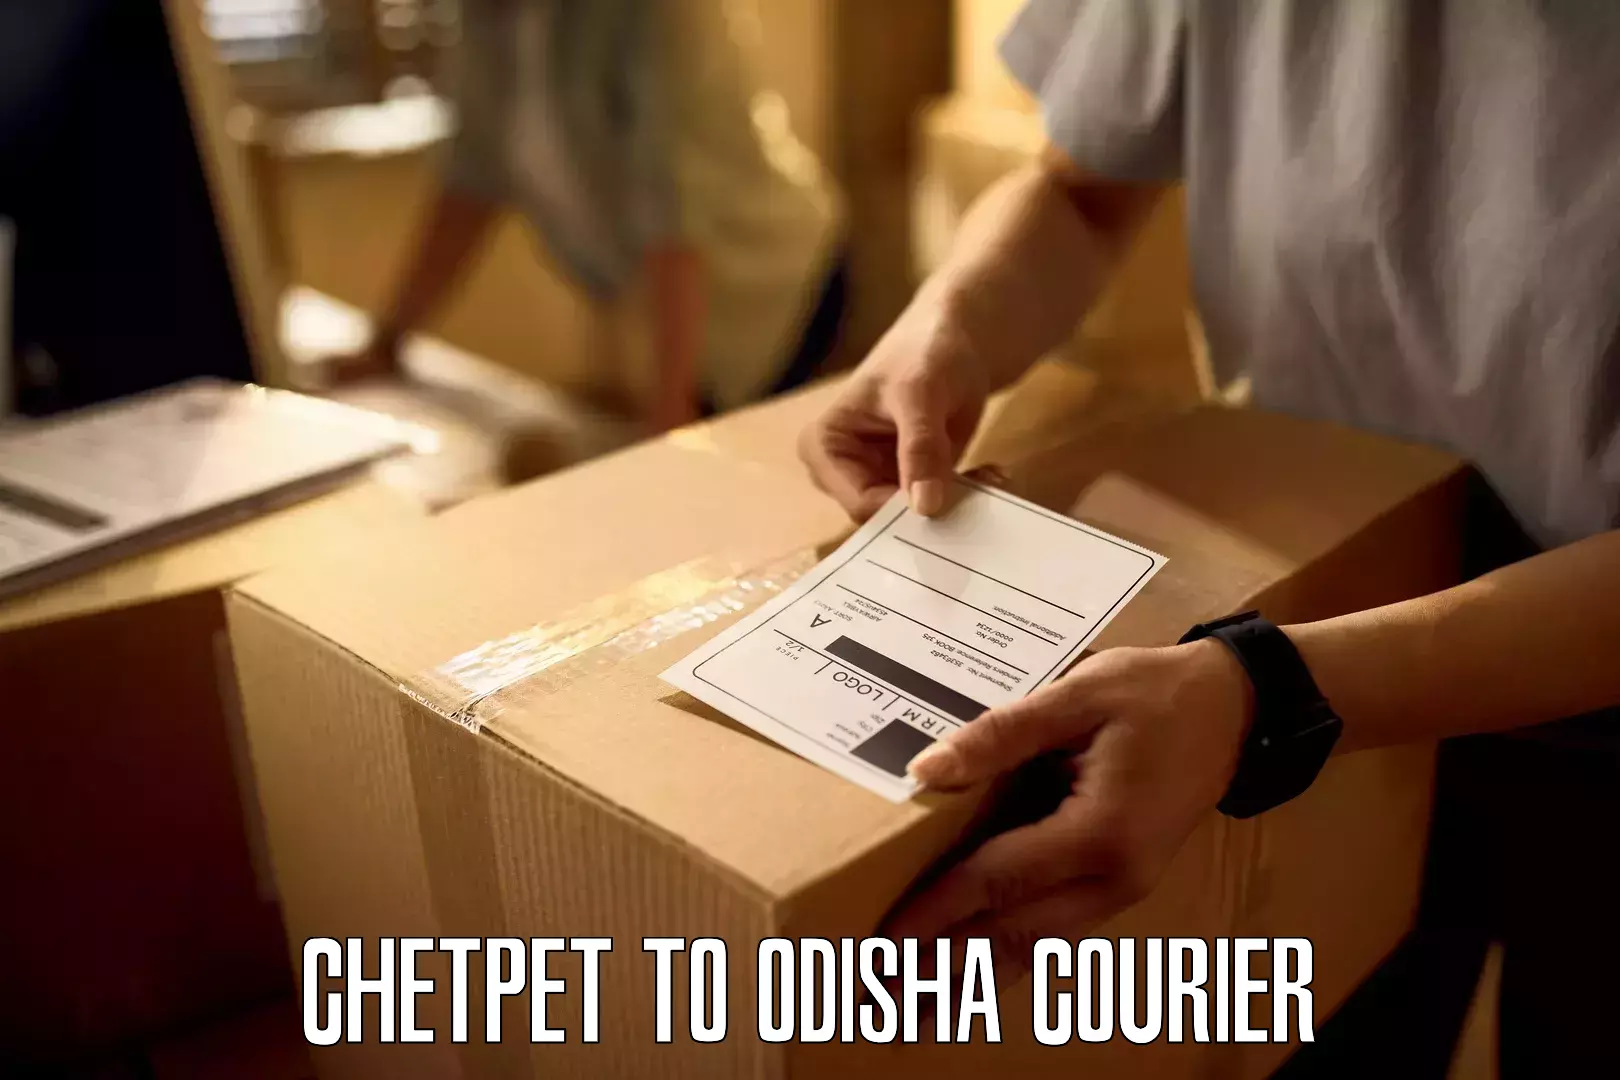 Courier service efficiency Chetpet to Angul